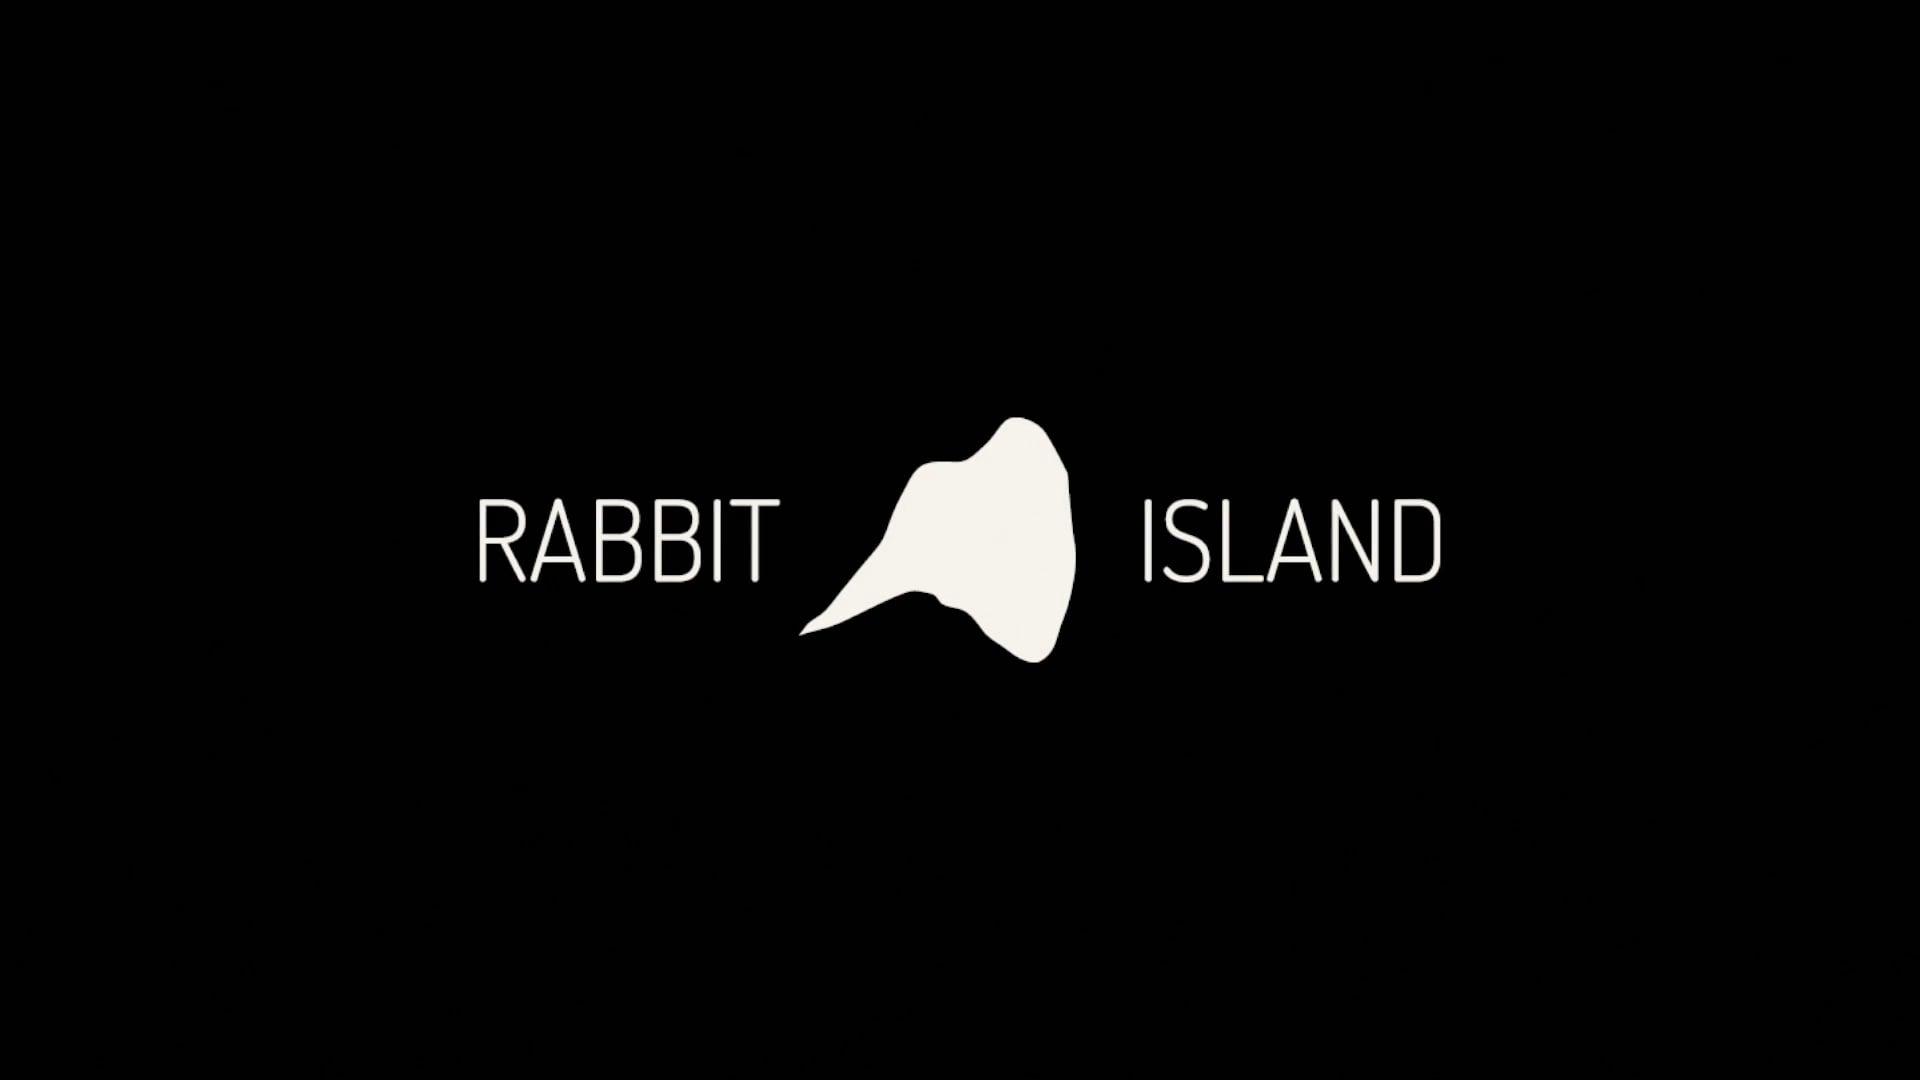 The Boardman Review & The Rabbit Island Foundation